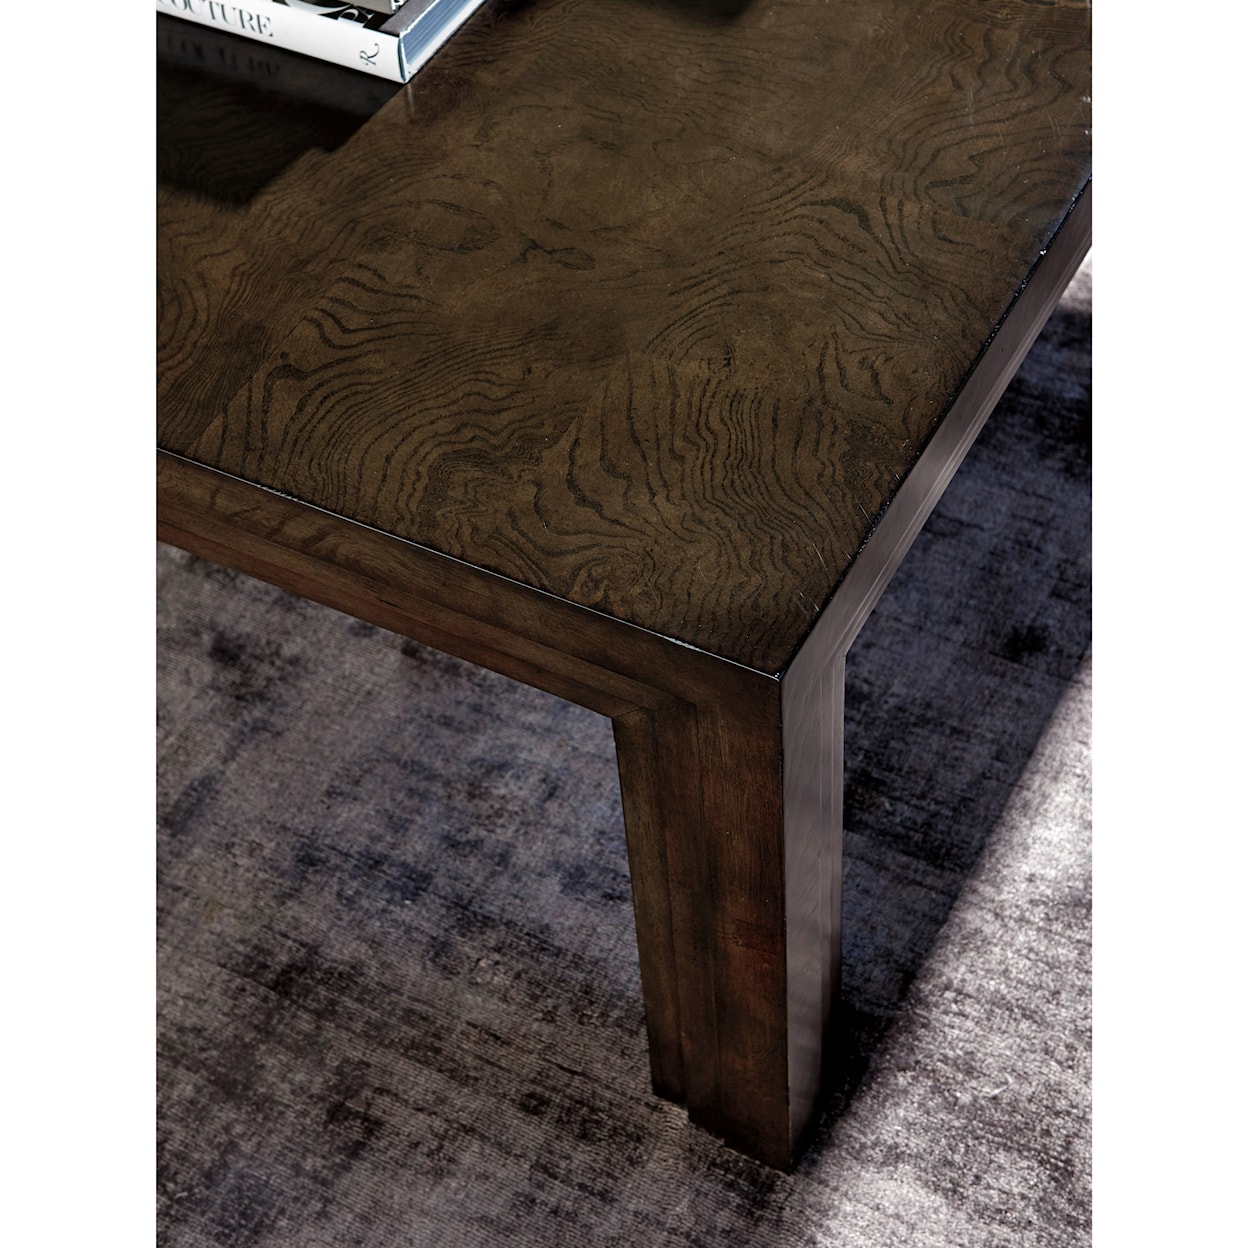 Barclay Butera Brentwood Essex Rectangular Cocktail Table